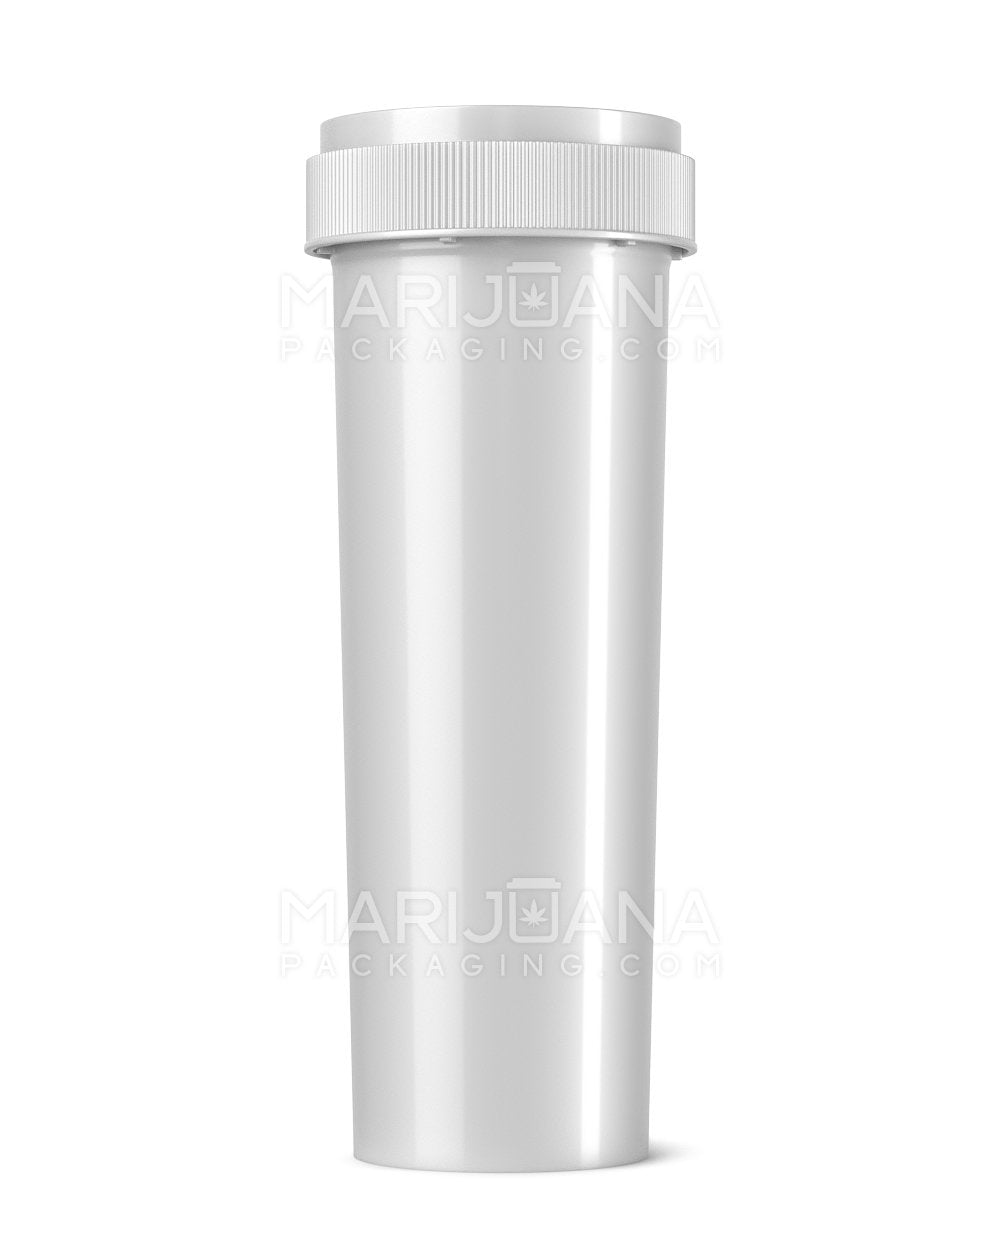 Child Resistant Opaque Silver Blank Reversible Cap Vials | 60dr - 14g | Sample - 1